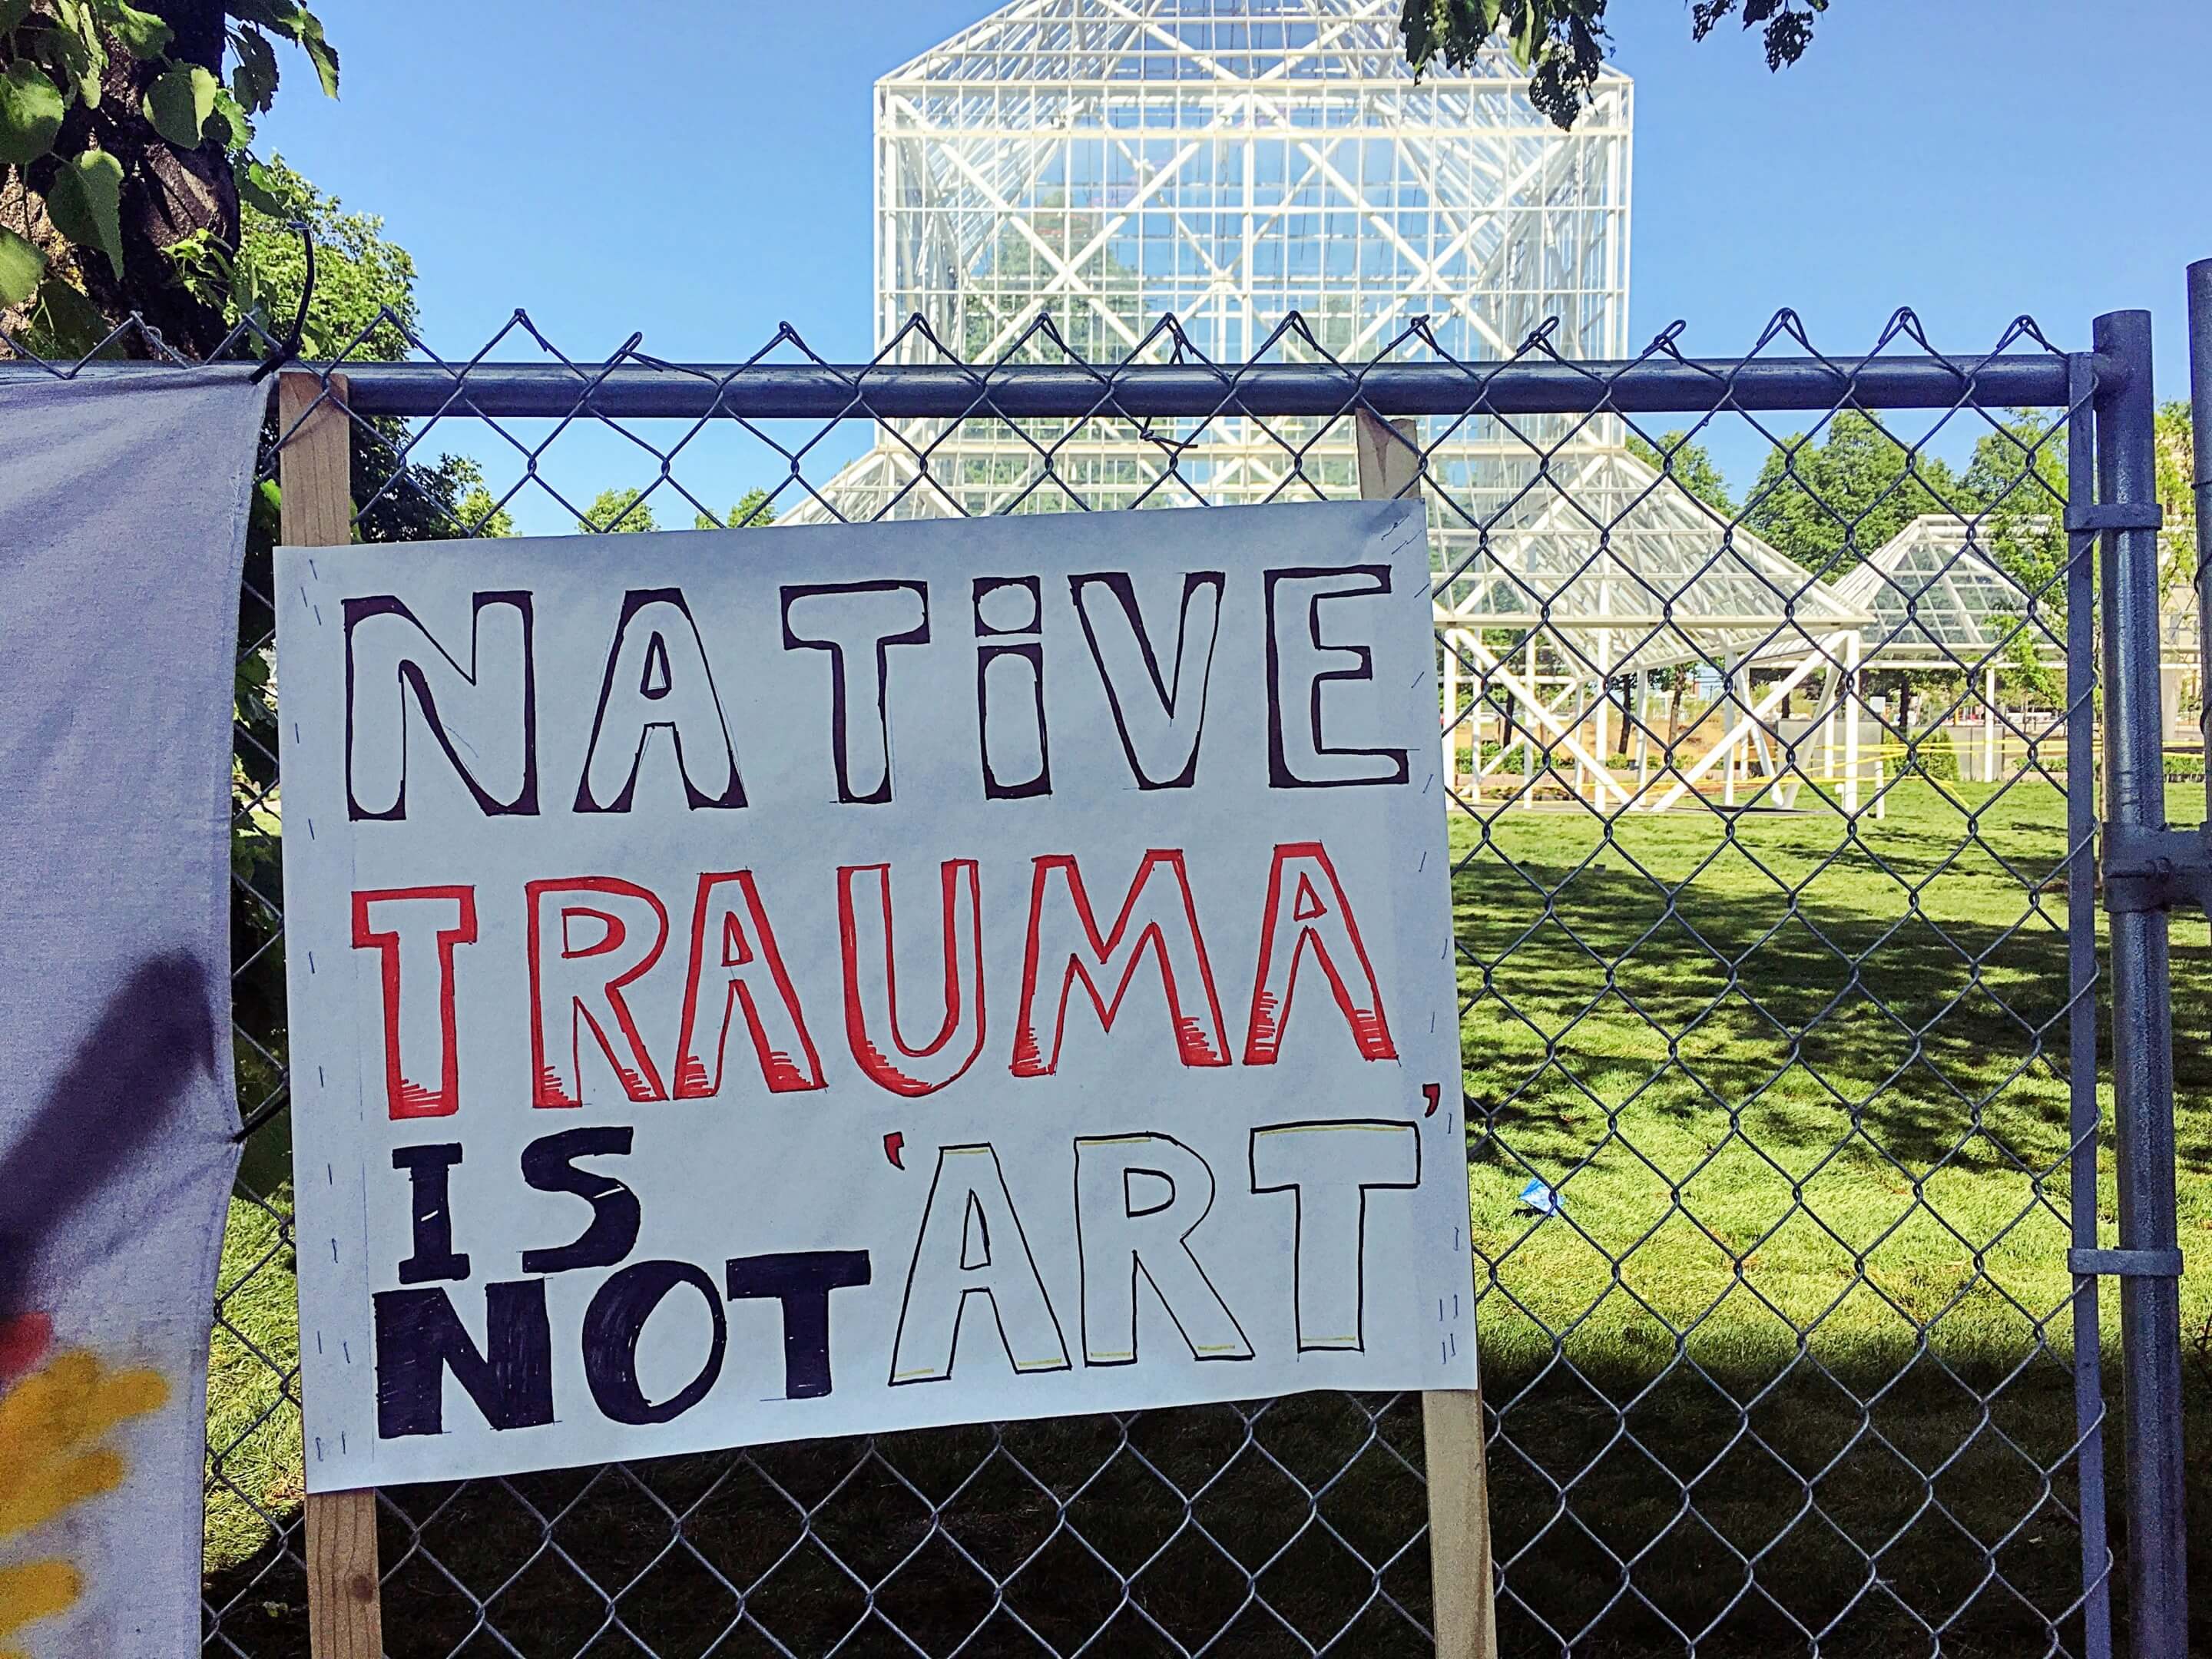 A protest sign in front of a scaffolding installation